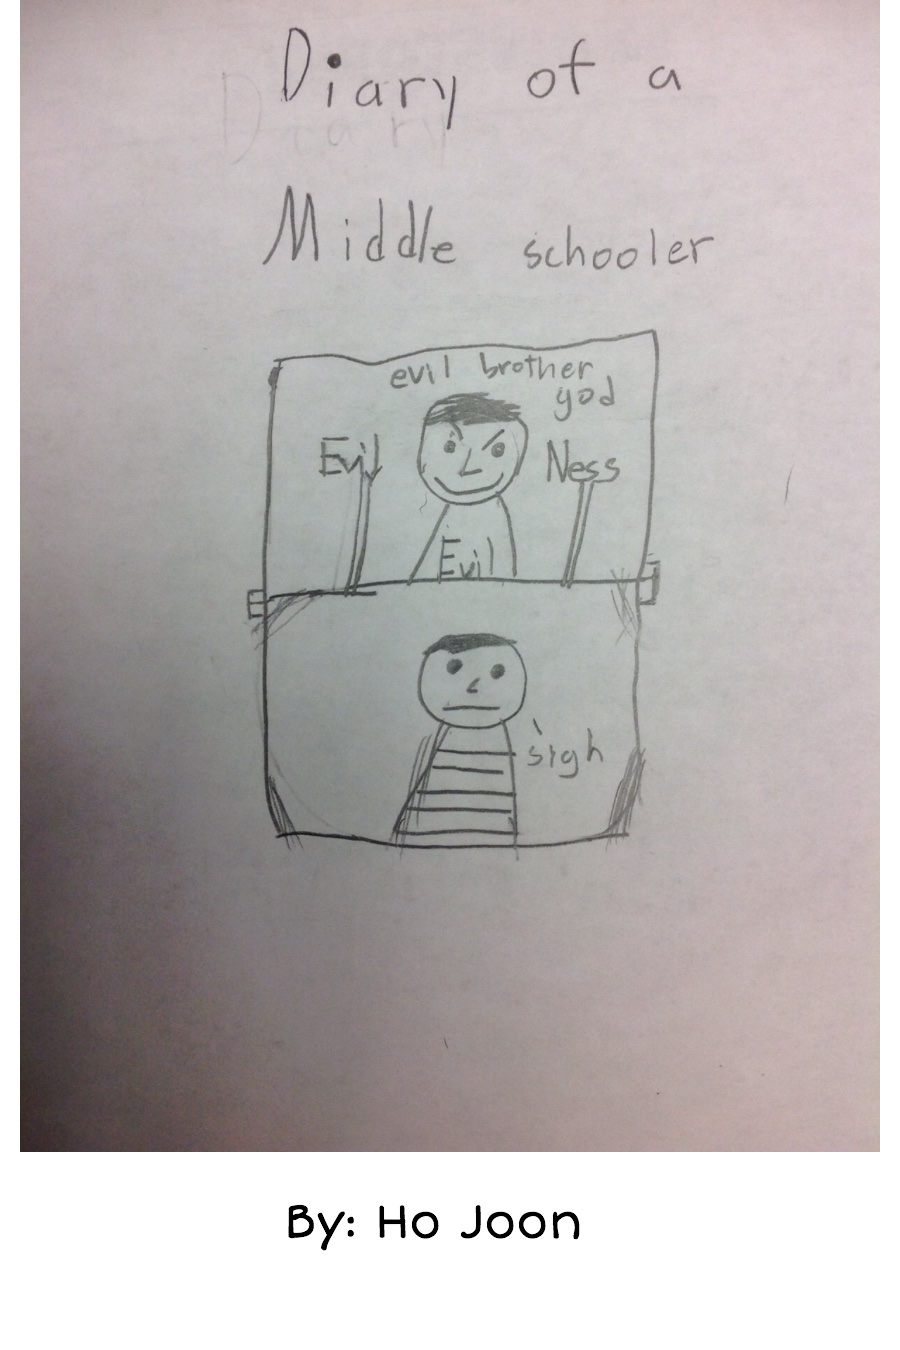 Diary of a Middle Schooler by Ho Joon